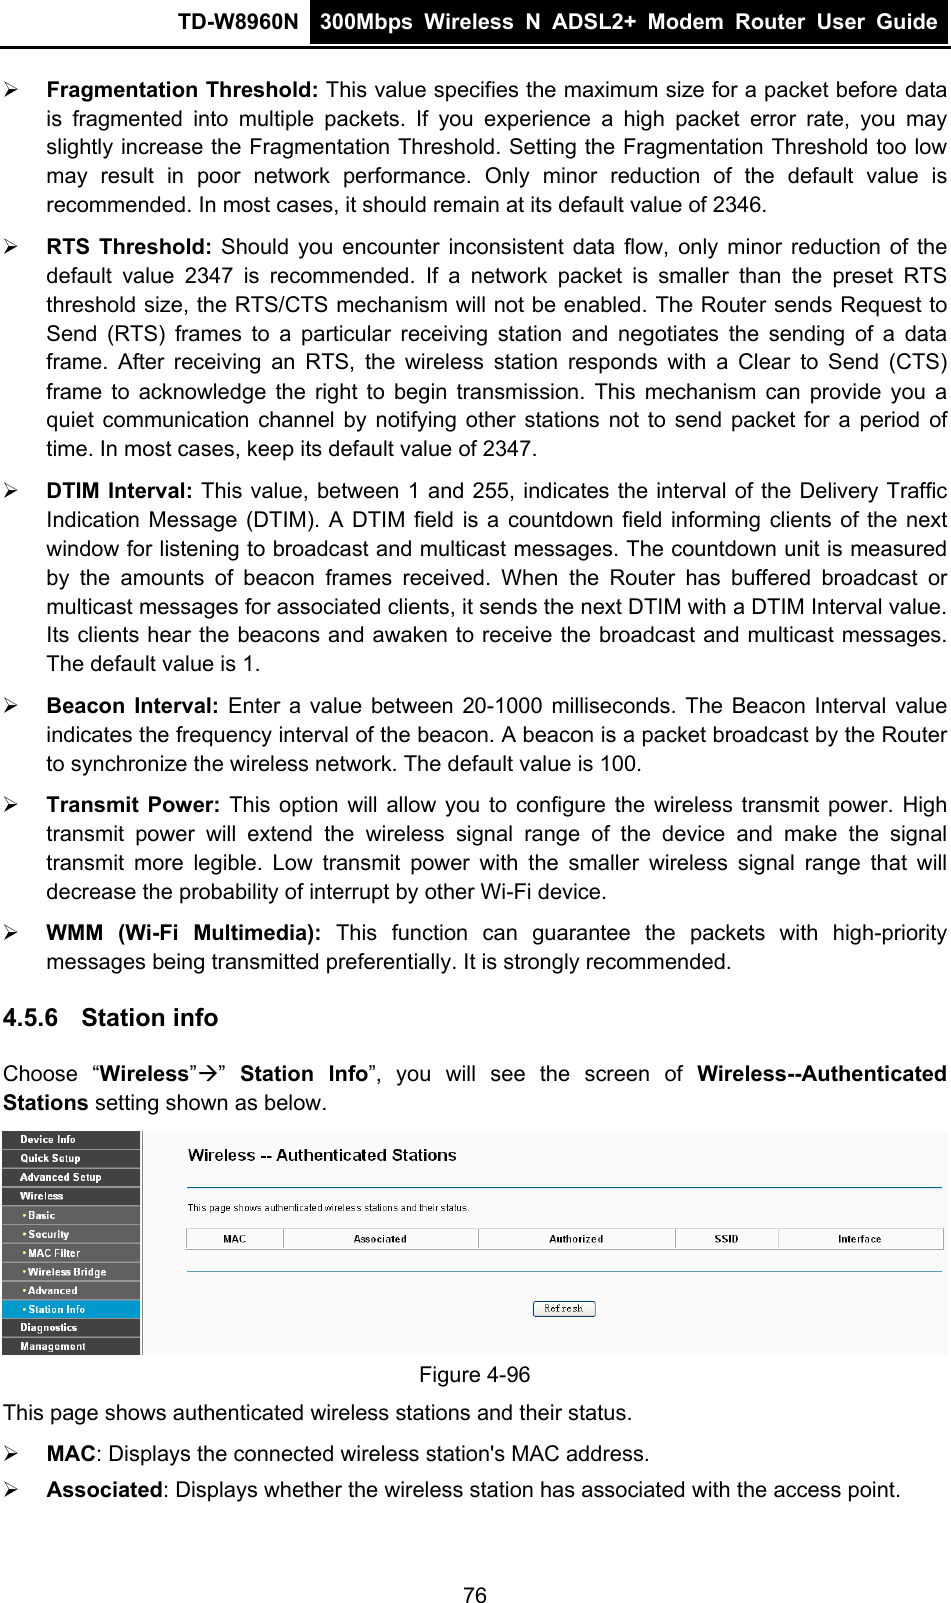 TD-W8960N  300Mbps Wireless N ADSL2+ Modem Router User Guide   Fragmentation Threshold: This value specifies the maximum size for a packet before data is fragmented into multiple packets. If you experience a high packet error rate, you may slightly increase the Fragmentation Threshold. Setting the Fragmentation Threshold too low may result in poor network performance. Only minor reduction of the default value is recommended. In most cases, it should remain at its default value of 2346.  RTS Threshold: Should you encounter inconsistent data flow, only minor reduction of the default value 2347 is recommended. If a network packet is smaller than the preset RTS threshold size, the RTS/CTS mechanism will not be enabled. The Router sends Request to Send (RTS) frames to a particular receiving station and negotiates the sending of a data frame. After receiving an RTS, the wireless station responds with a Clear to Send (CTS) frame to acknowledge the right to begin transmission. This mechanism can provide you a quiet communication channel by notifying other stations not to send packet for a period of time. In most cases, keep its default value of 2347.  DTIM Interval: This value, between 1 and 255, indicates the interval of the Delivery Traffic Indication Message (DTIM). A DTIM field is a countdown field informing clients of the next window for listening to broadcast and multicast messages. The countdown unit is measured by the amounts of beacon frames received. When the Router has buffered broadcast or multicast messages for associated clients, it sends the next DTIM with a DTIM Interval value. Its clients hear the beacons and awaken to receive the broadcast and multicast messages. The default value is 1.  Beacon Interval: Enter a value between 20-1000 milliseconds. The Beacon Interval value indicates the frequency interval of the beacon. A beacon is a packet broadcast by the Router to synchronize the wireless network. The default value is 100.  Transmit Power: This option will allow you to configure the wireless transmit power. High transmit power will extend the wireless signal range of the device and make the signal transmit more legible. Low transmit power with the smaller wireless signal range that will decrease the probability of interrupt by other Wi-Fi device.  WMM (Wi-Fi Multimedia): This function can guarantee the packets with high-priority messages being transmitted preferentially. It is strongly recommended. 4.5.6  Station info Choose “Wireless””  Station Info”, you will see the screen of Wireless--Authenticated Stations setting shown as below.  Figure 4-96 This page shows authenticated wireless stations and their status.  MAC: Displays the connected wireless station&apos;s MAC address.  Associated: Displays whether the wireless station has associated with the access point. 76 